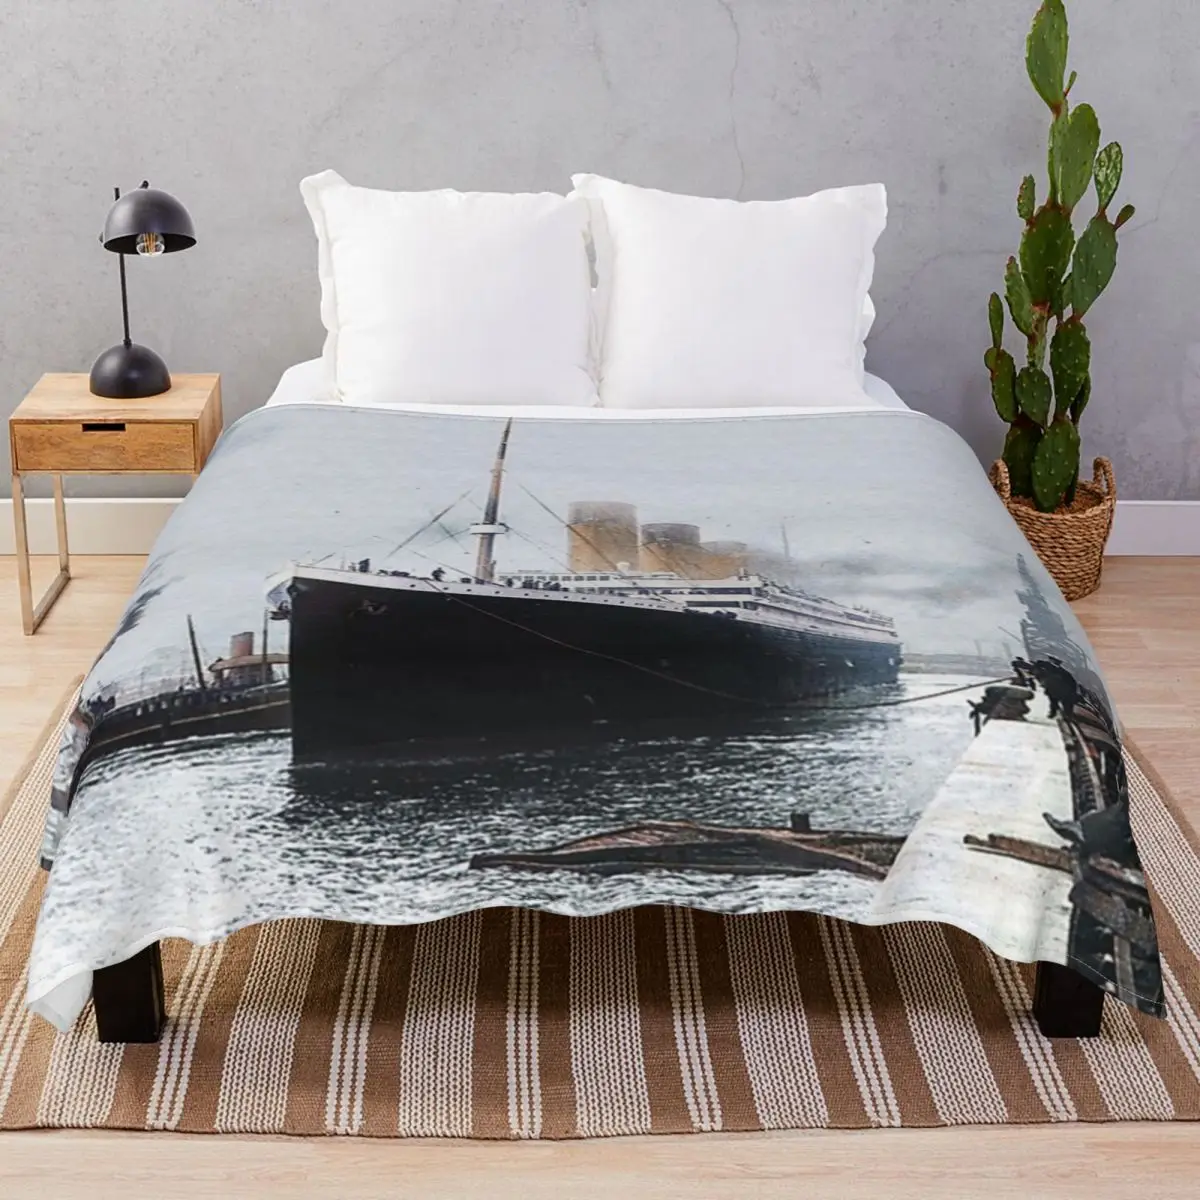 Titanic Prepares To Leave Port Blanket Fleece Summer Warm Throw Blankets for Bed Home Couch Travel Cinema